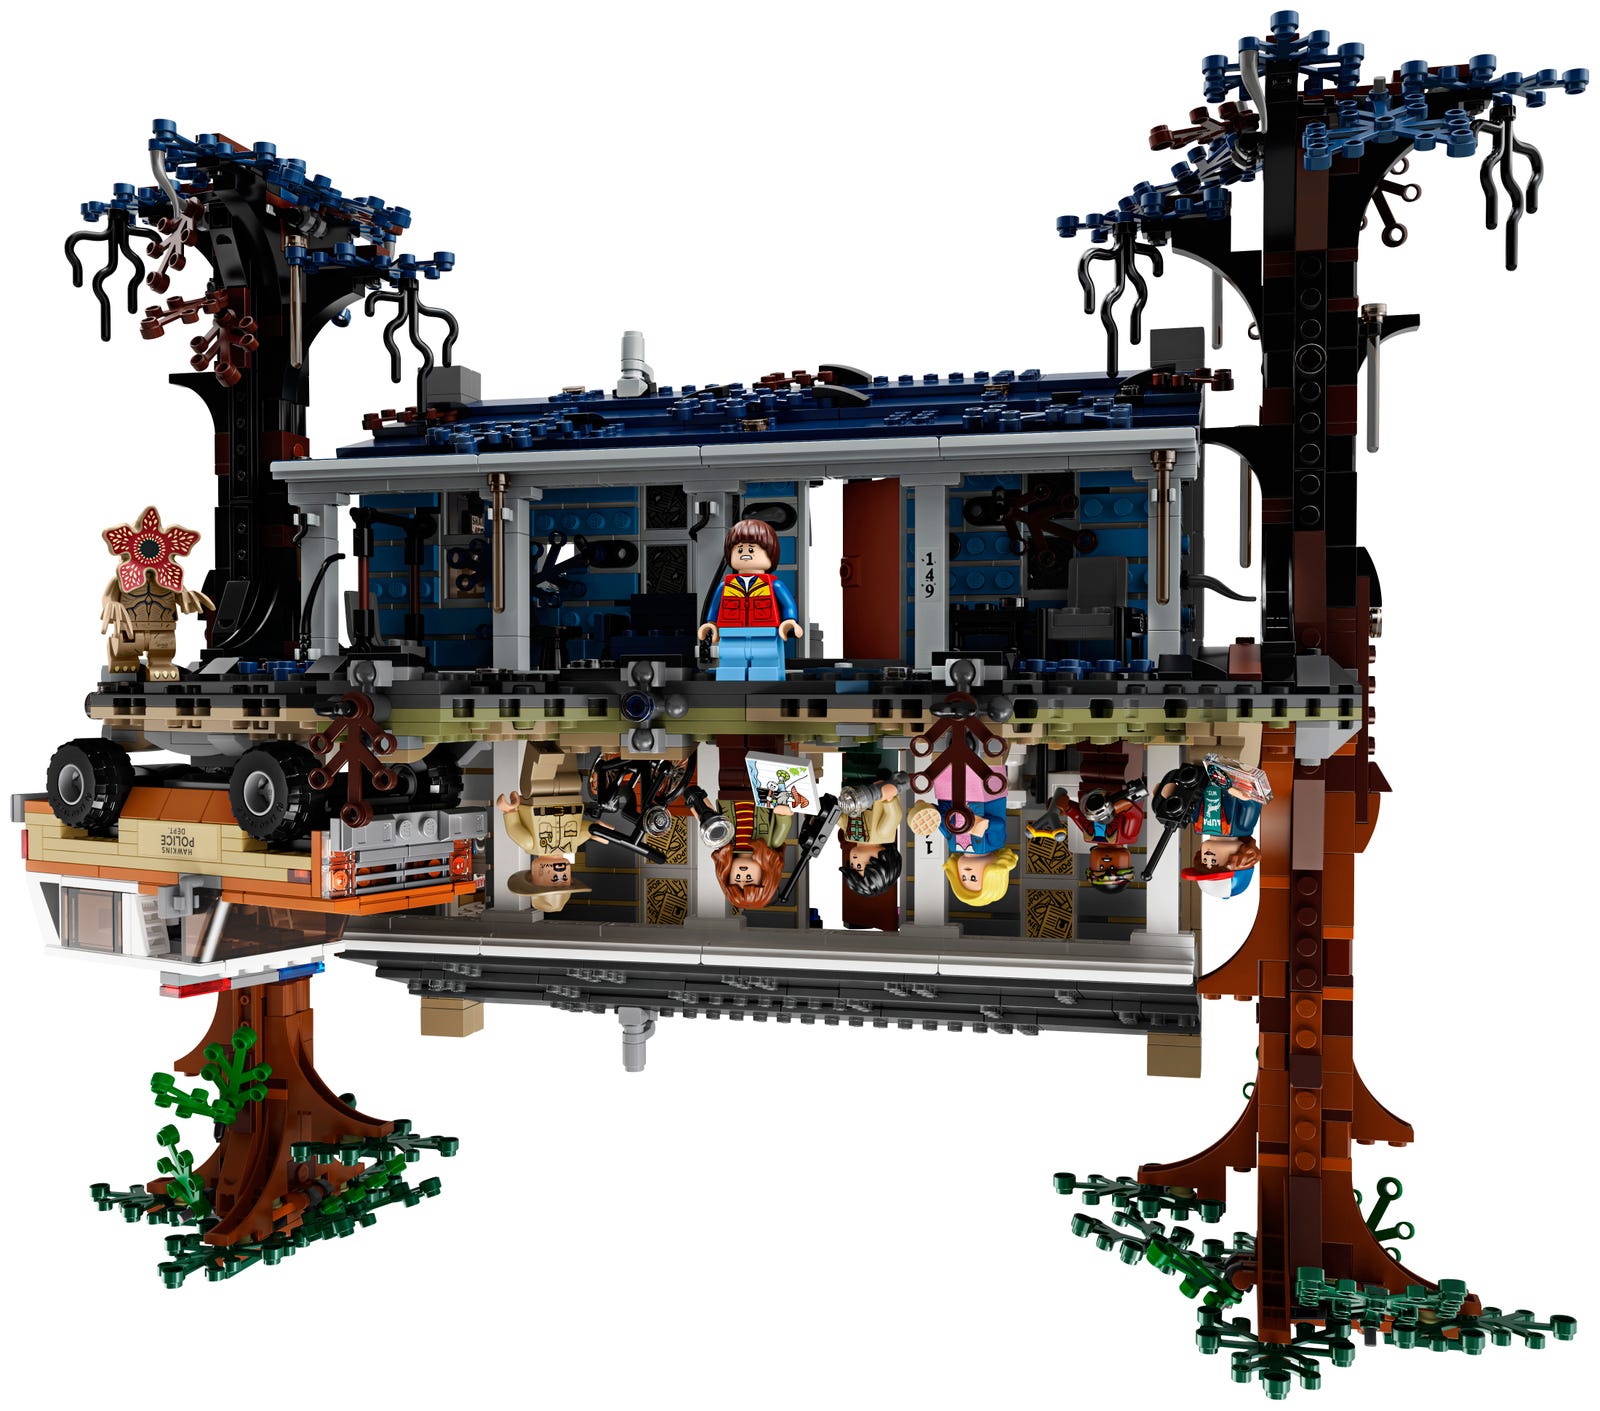 huur-lego-stranger-things-the-upside-down-75810